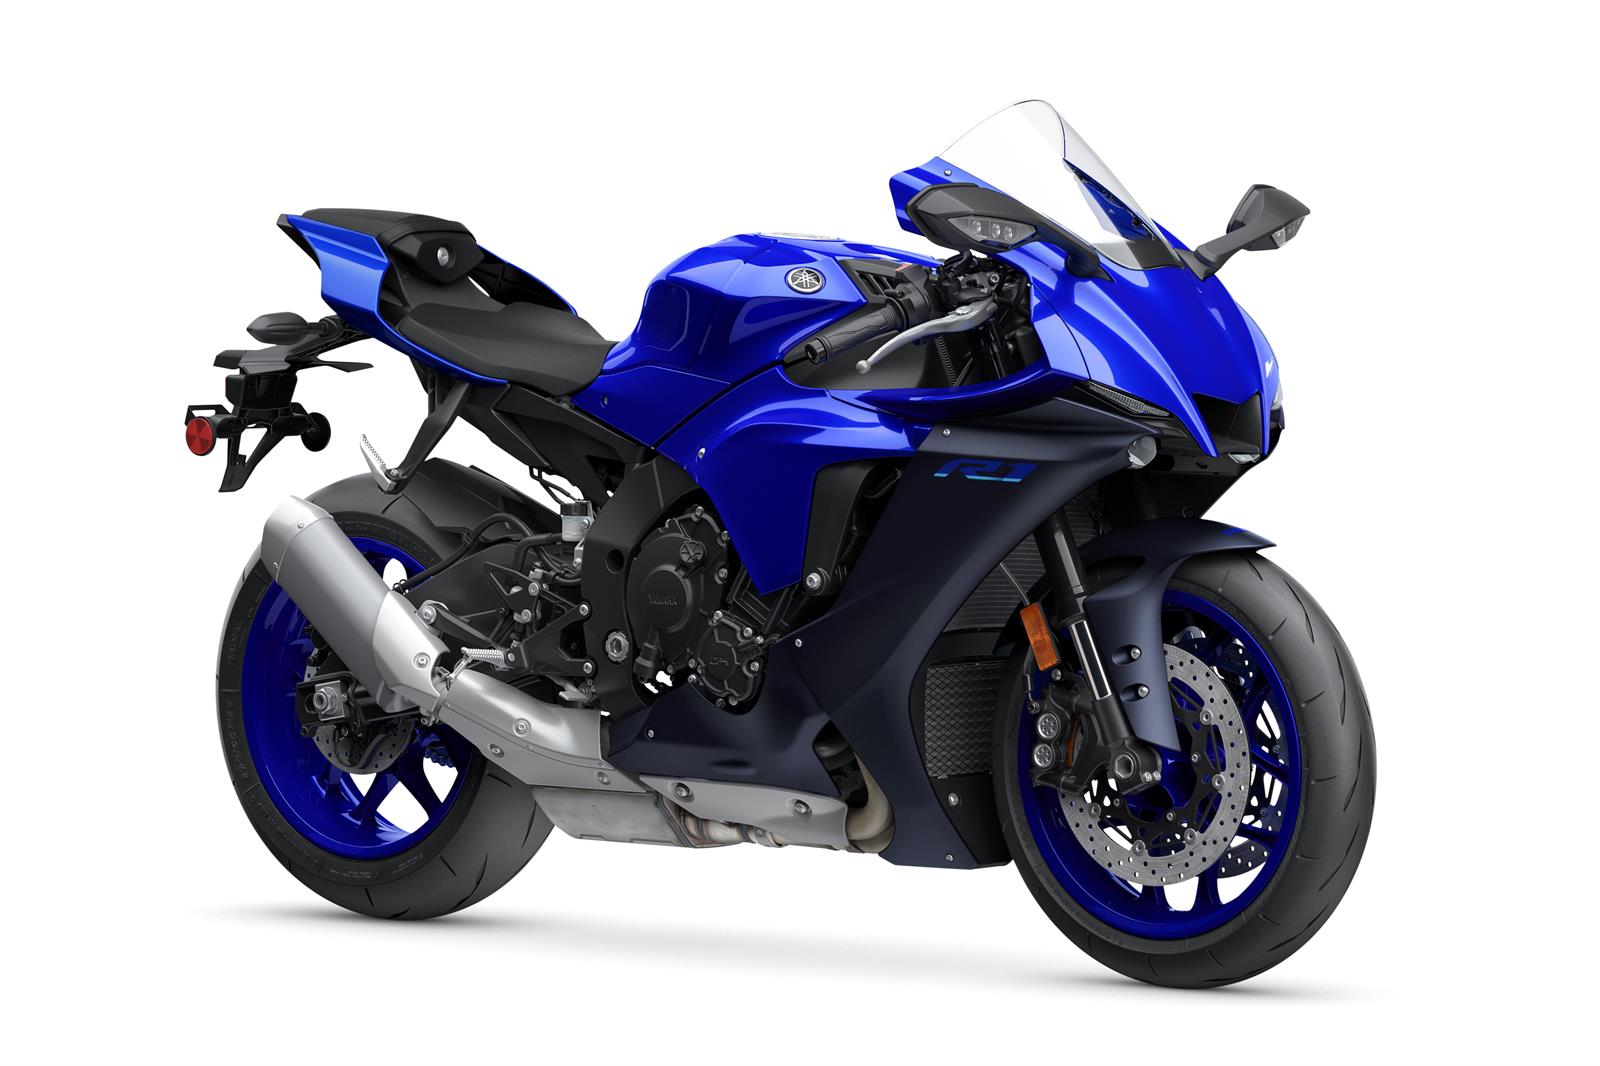 Yamaha YZF-R1 Motorcycle For Sale